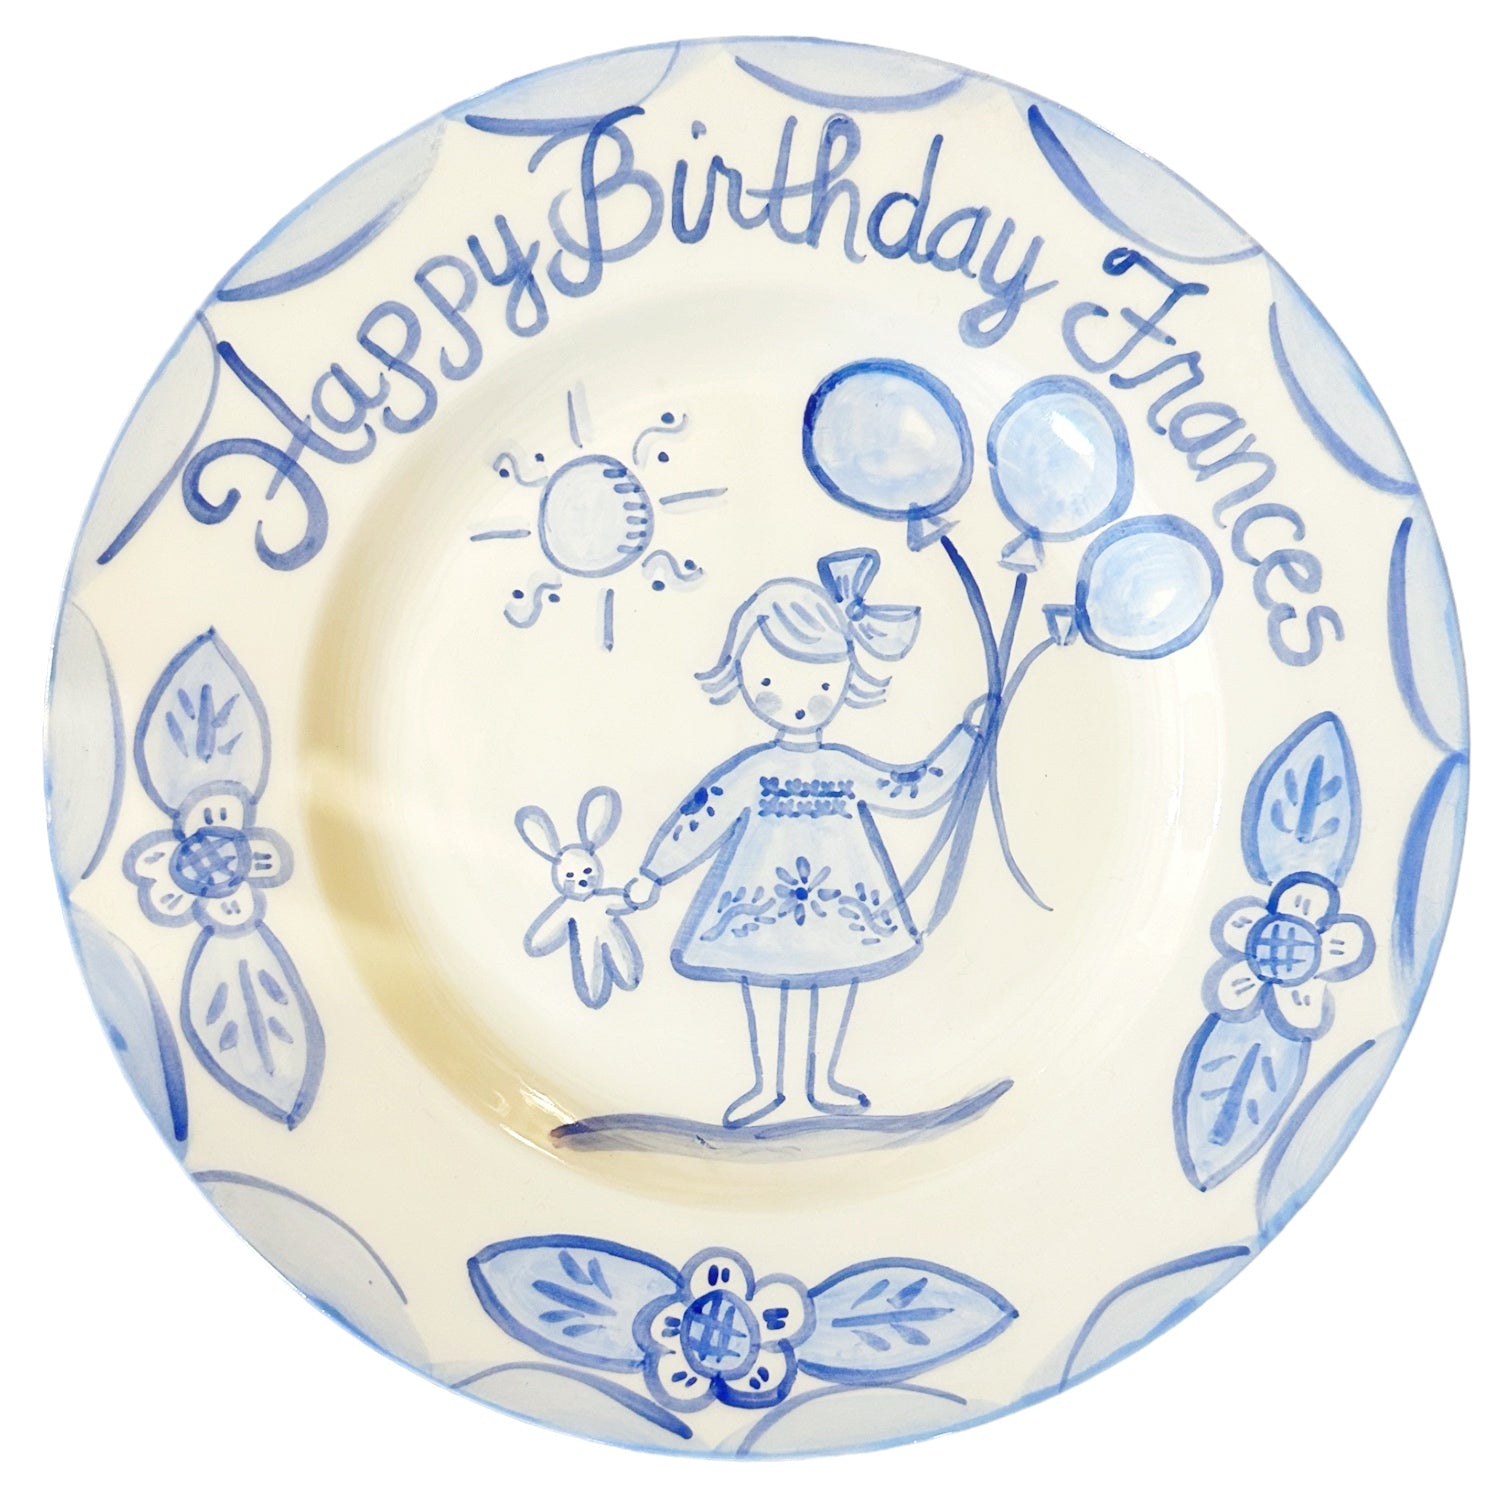 Birthday Plate - Girl with Balloons and Bunny (Blue/White) - Premium  from Tricia Lowenfield Shop 